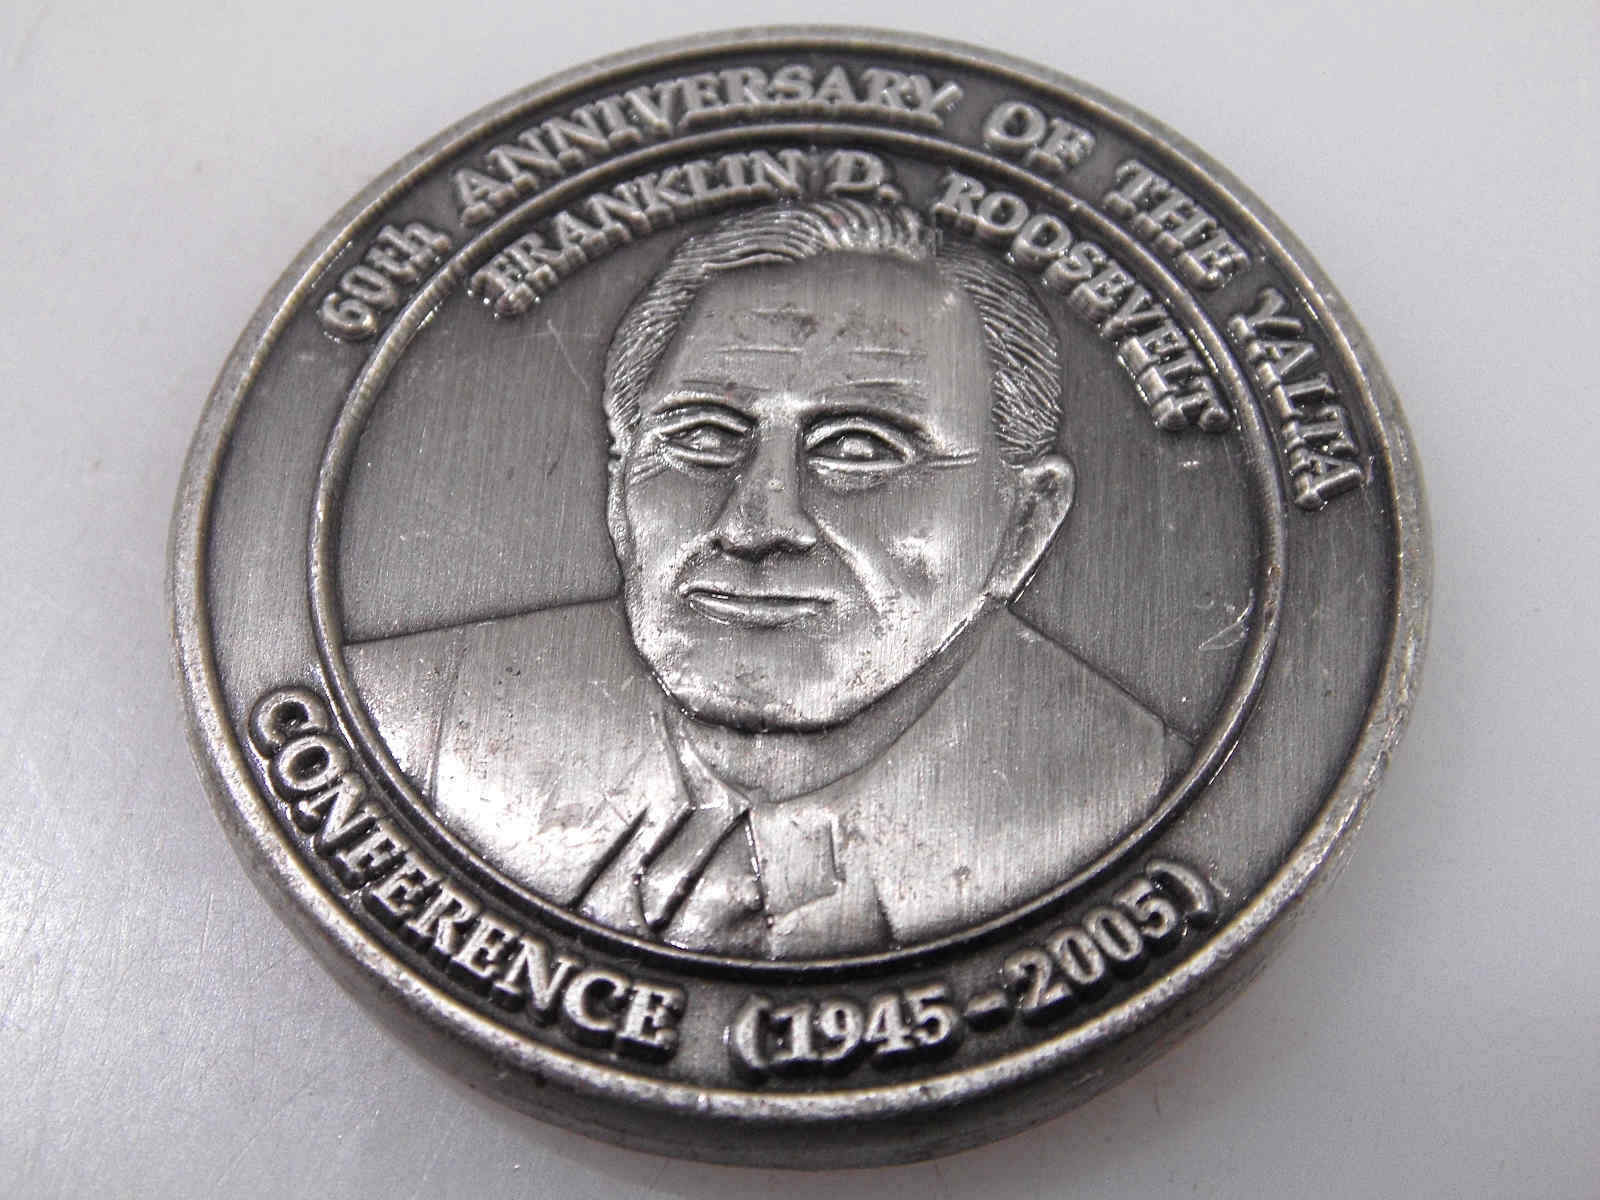 MIDWAY ISLANDS FIVE DOLLARS 60TH ANNIVERSARY OF THE YALTA CHALLENGE COIN